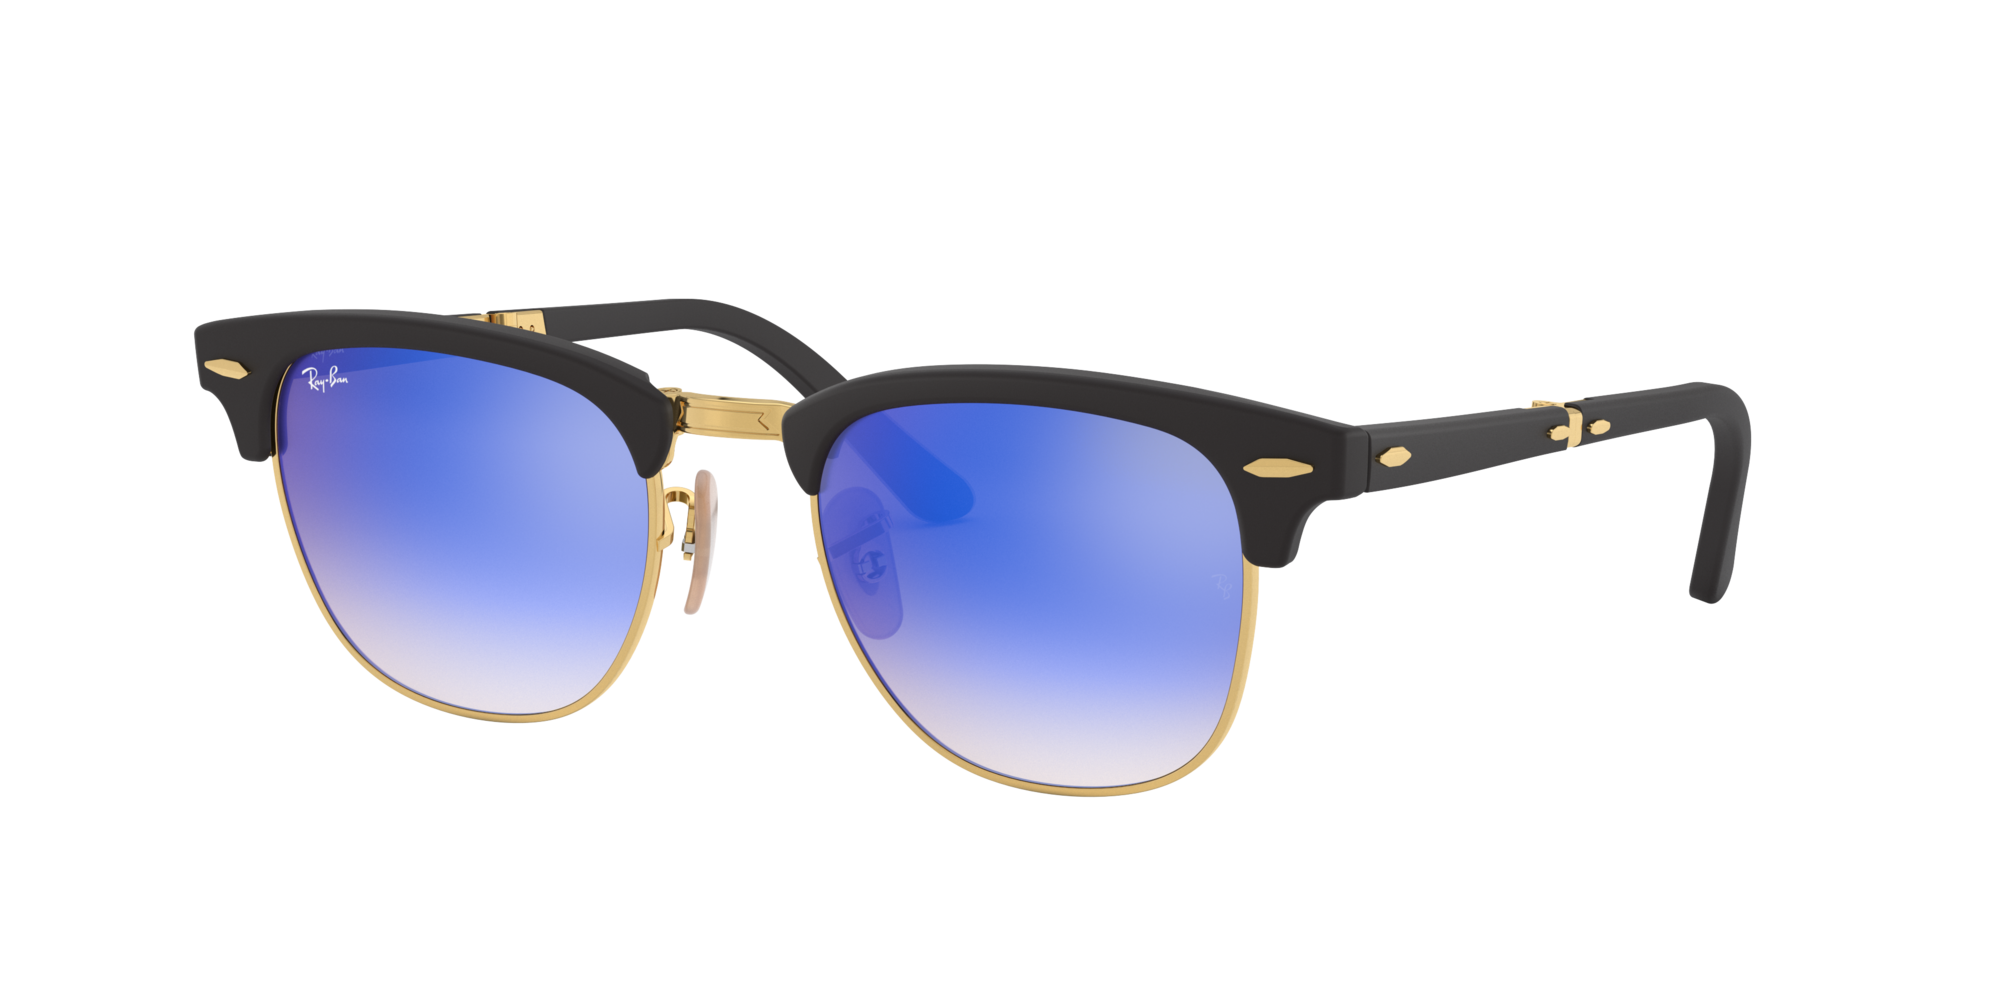 ray ban foldable clubmaster sunglasses